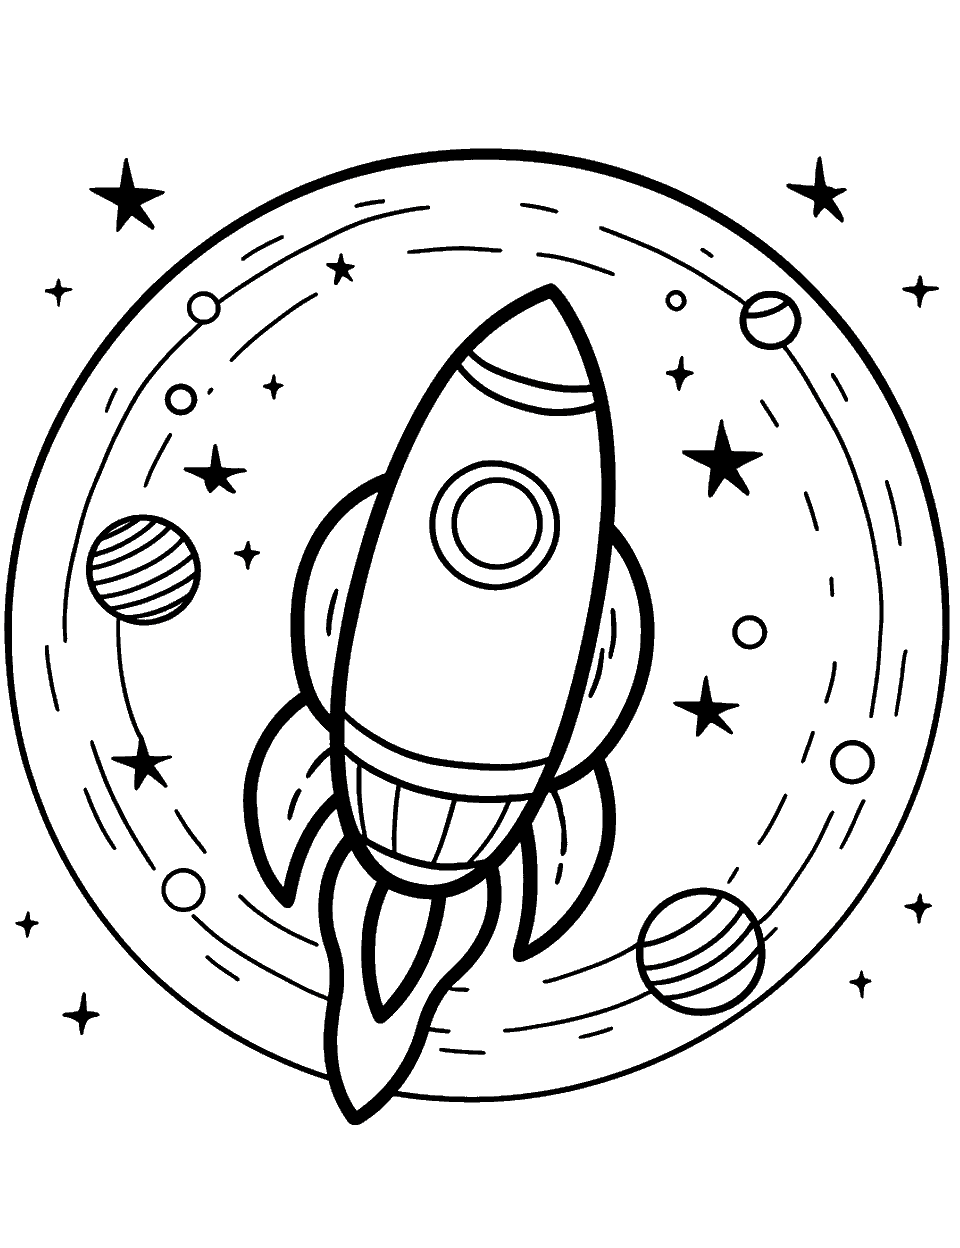 Spacecraft Traveling Through Space Solar System Coloring Page - A spacecraft with a glowing tail traveling through space.